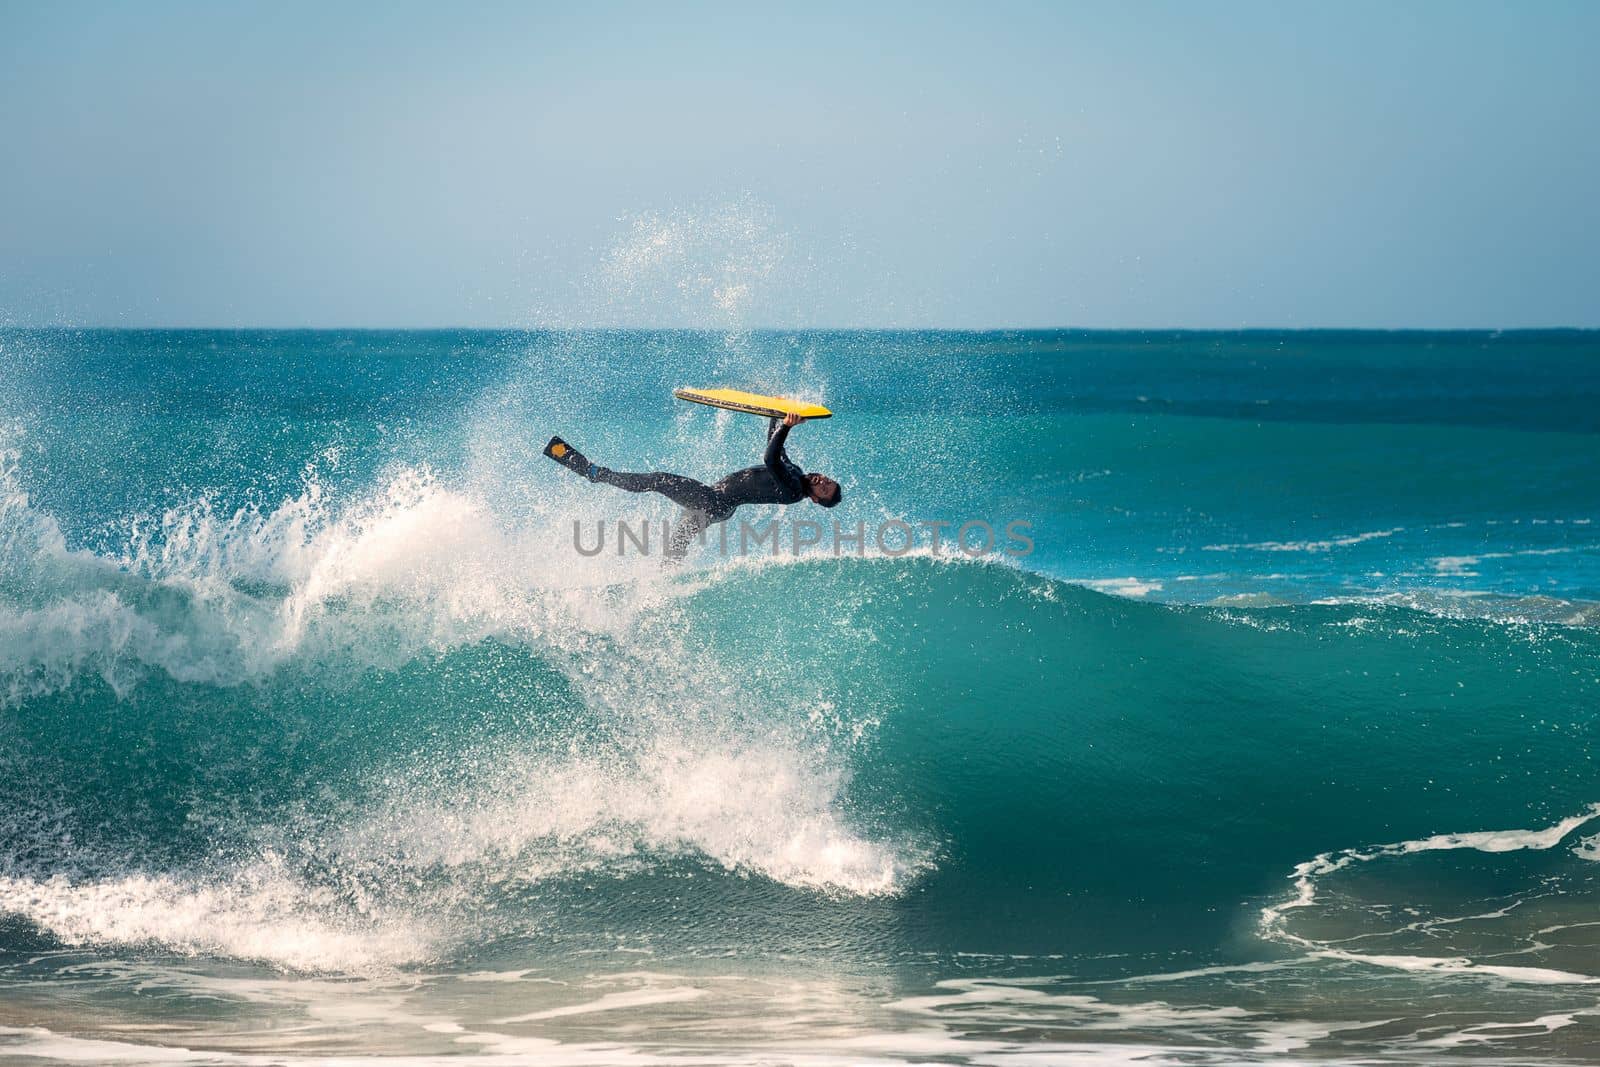 surfer doing an invert jump with his bodyboard by raulmelldo